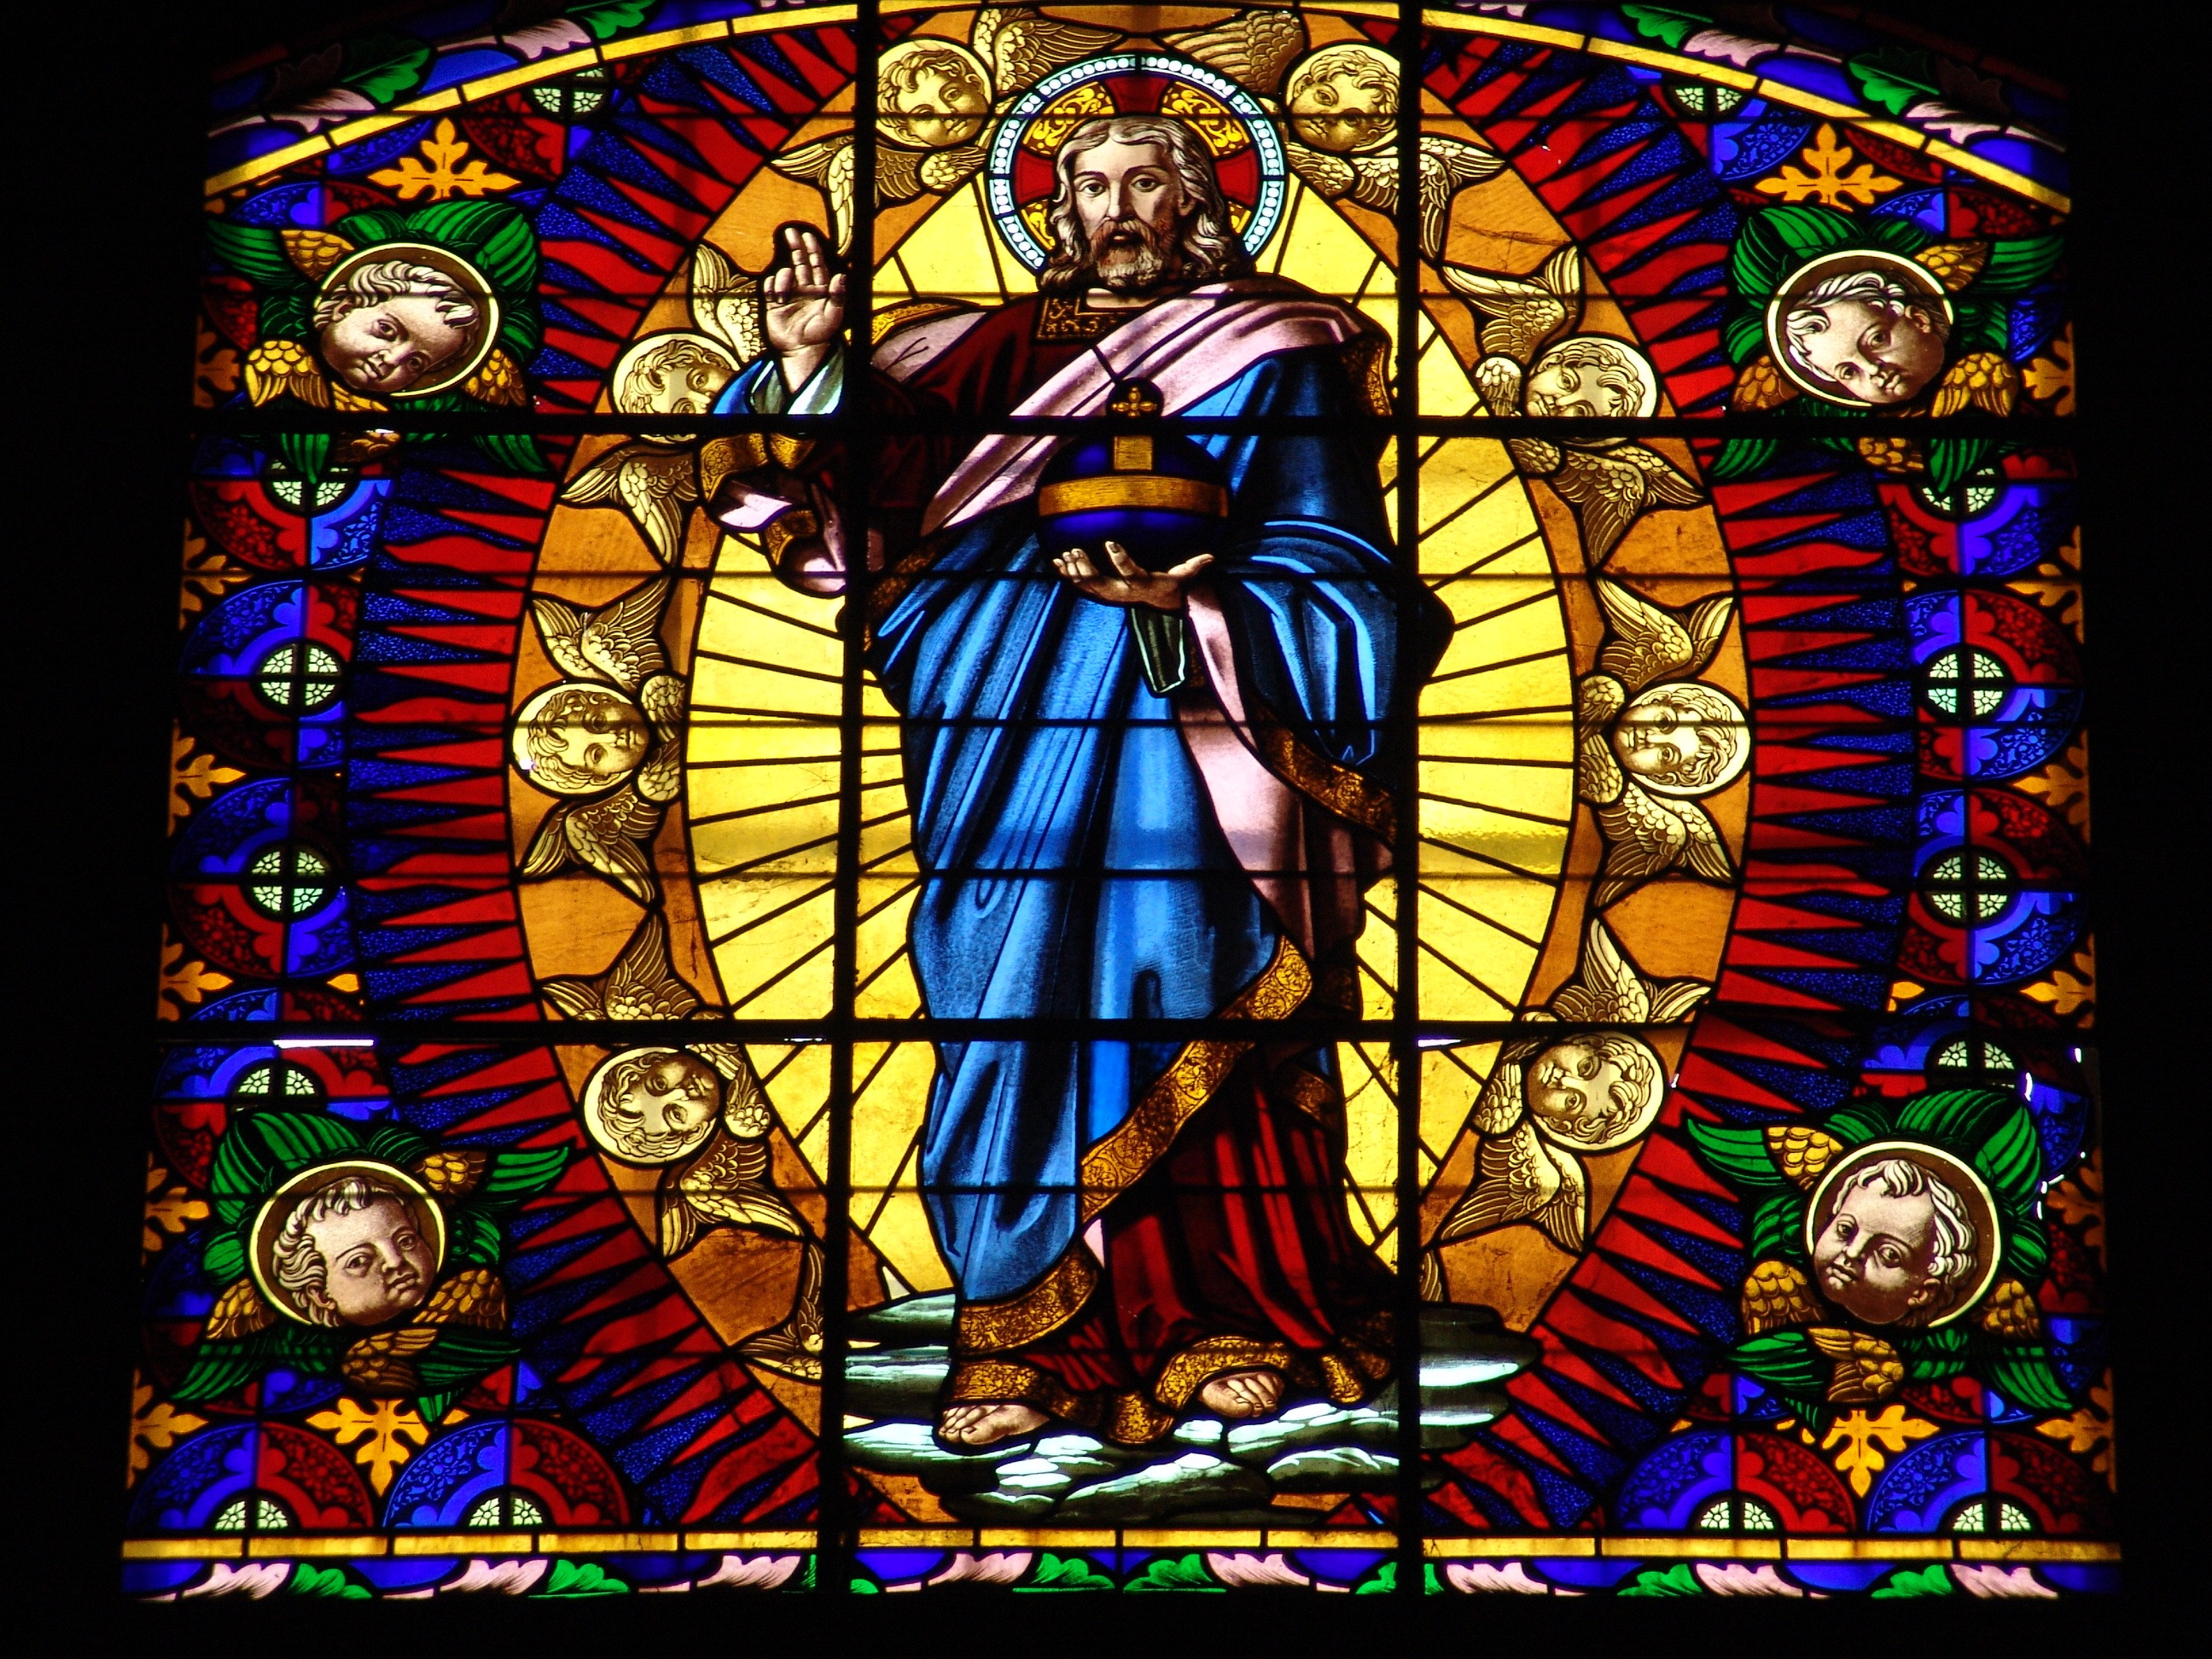 Church Stained Glass Wallpaper